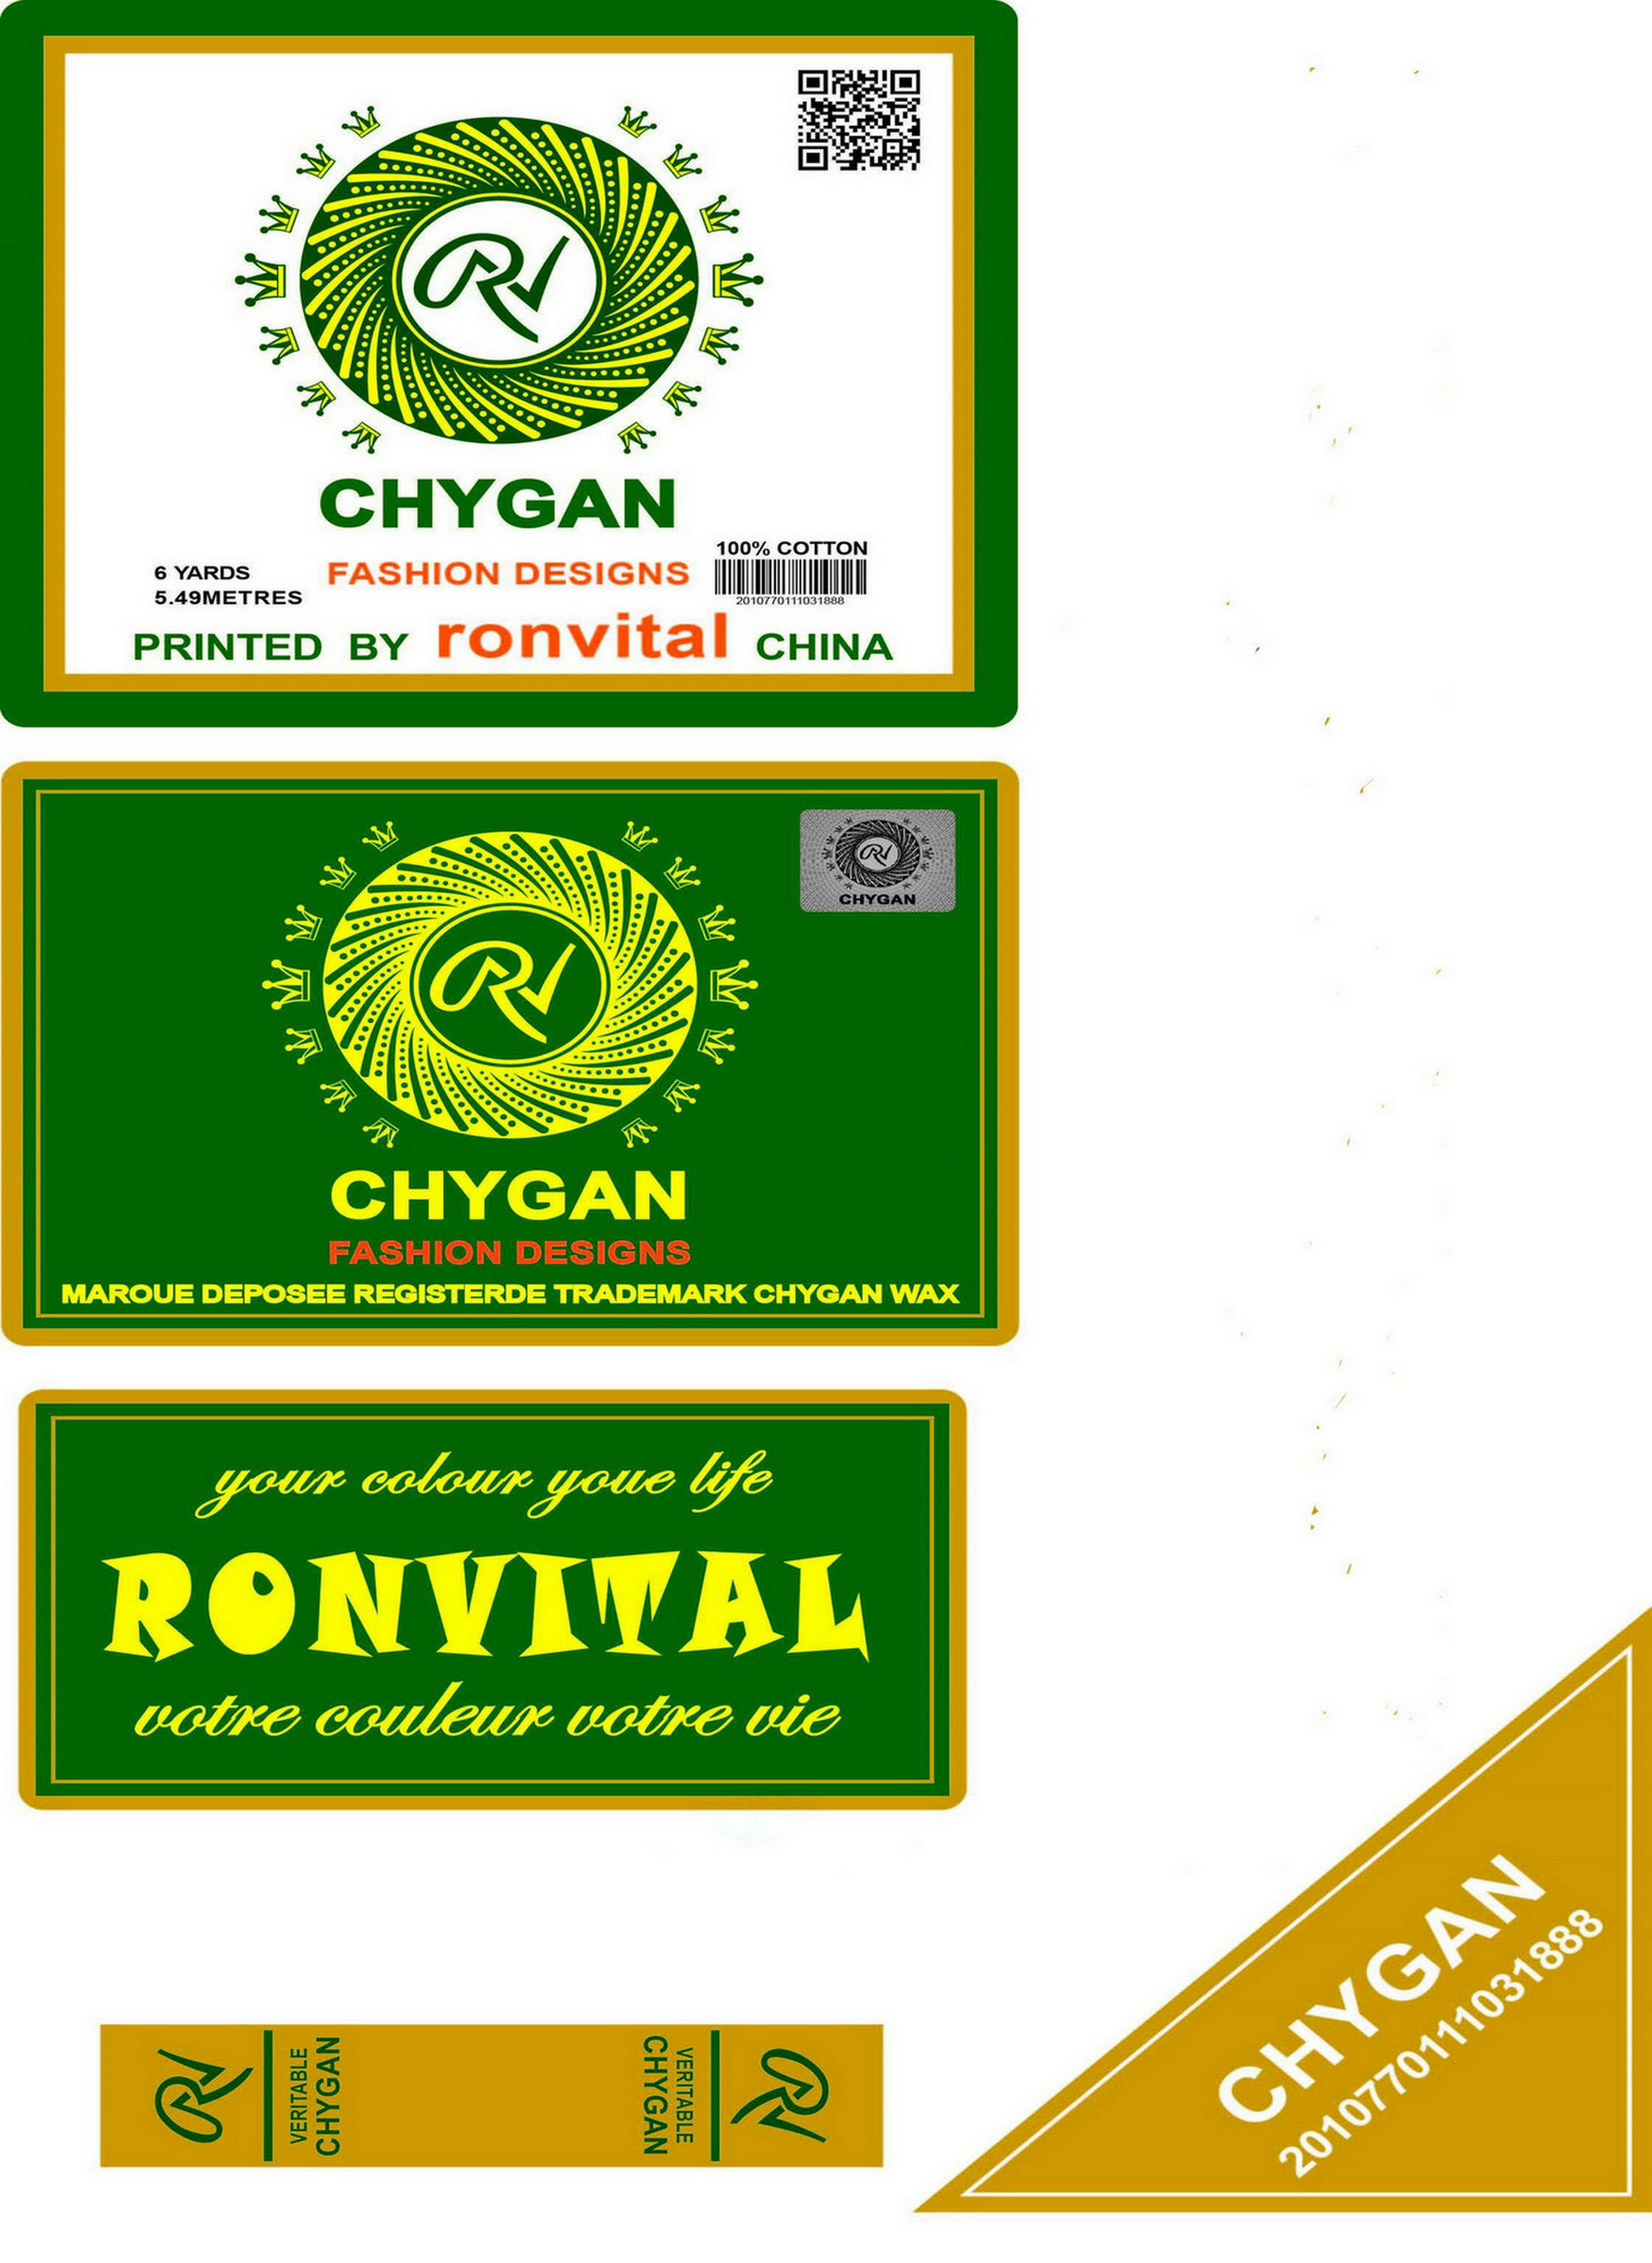 Best quality with "CHYGAN"